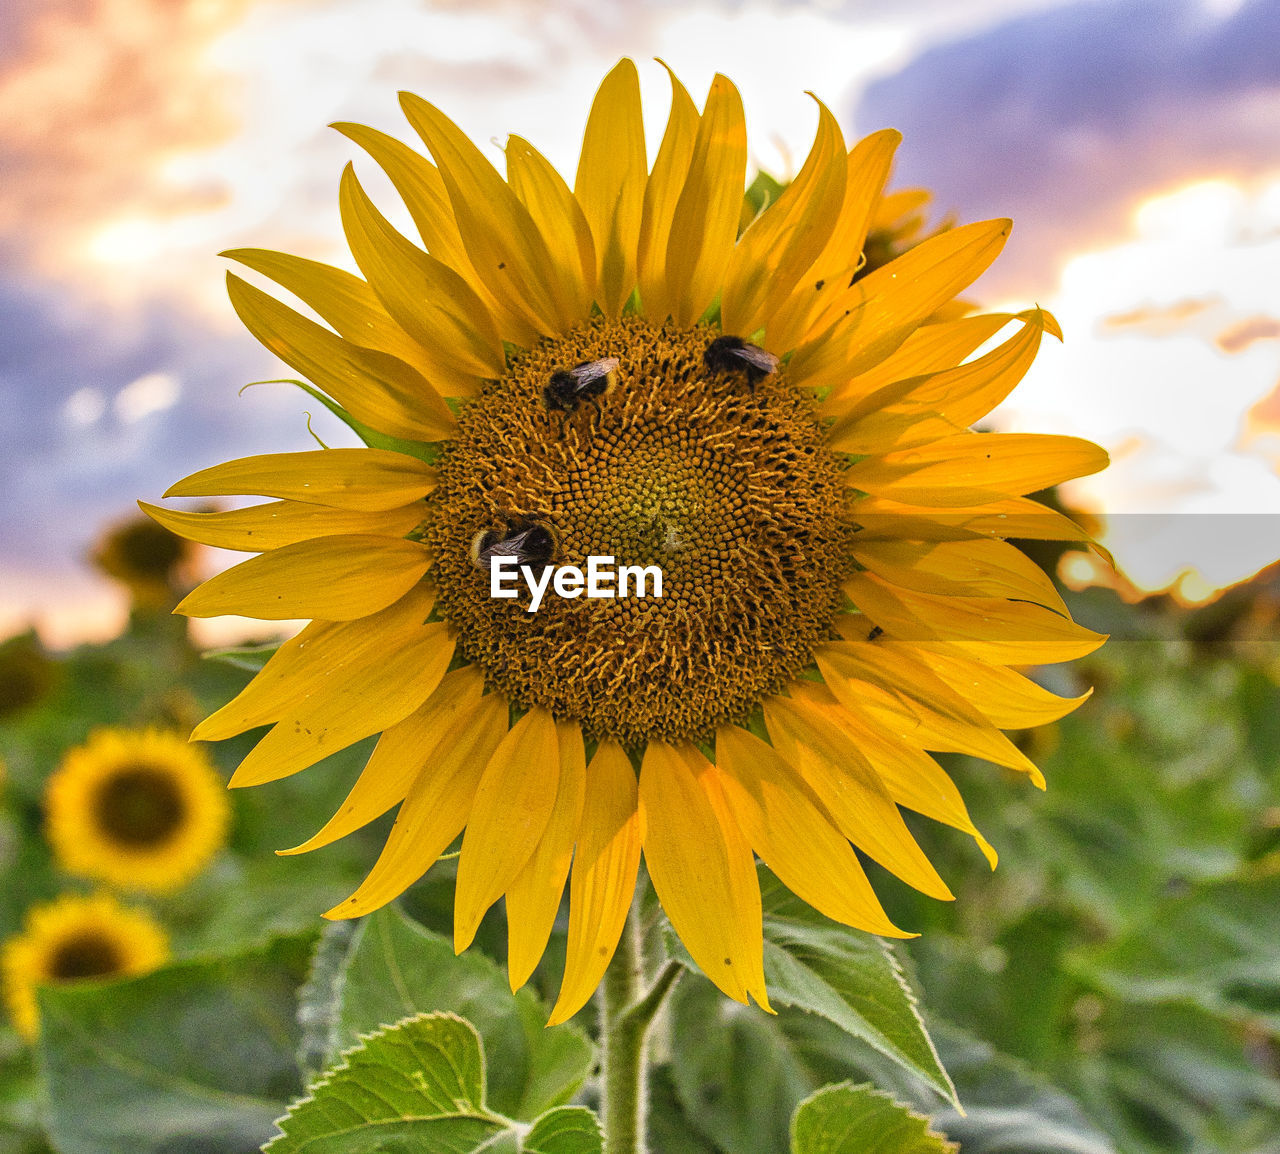 sunflower, flower, flowering plant, plant, flower head, beauty in nature, freshness, yellow, sky, nature, cloud, petal, field, growth, inflorescence, landscape, rural scene, sunflower seed, close-up, asterales, fragility, animal wildlife, animal themes, pollen, macro photography, animal, no people, insect, land, environment, summer, plant part, agriculture, leaf, sunlight, outdoors, one animal, springtime, focus on foreground, seed, vibrant color, macro, wildflower, day, blossom, crop, botany, farm, sunset, wildlife, vegetarian food, bee, travel destinations